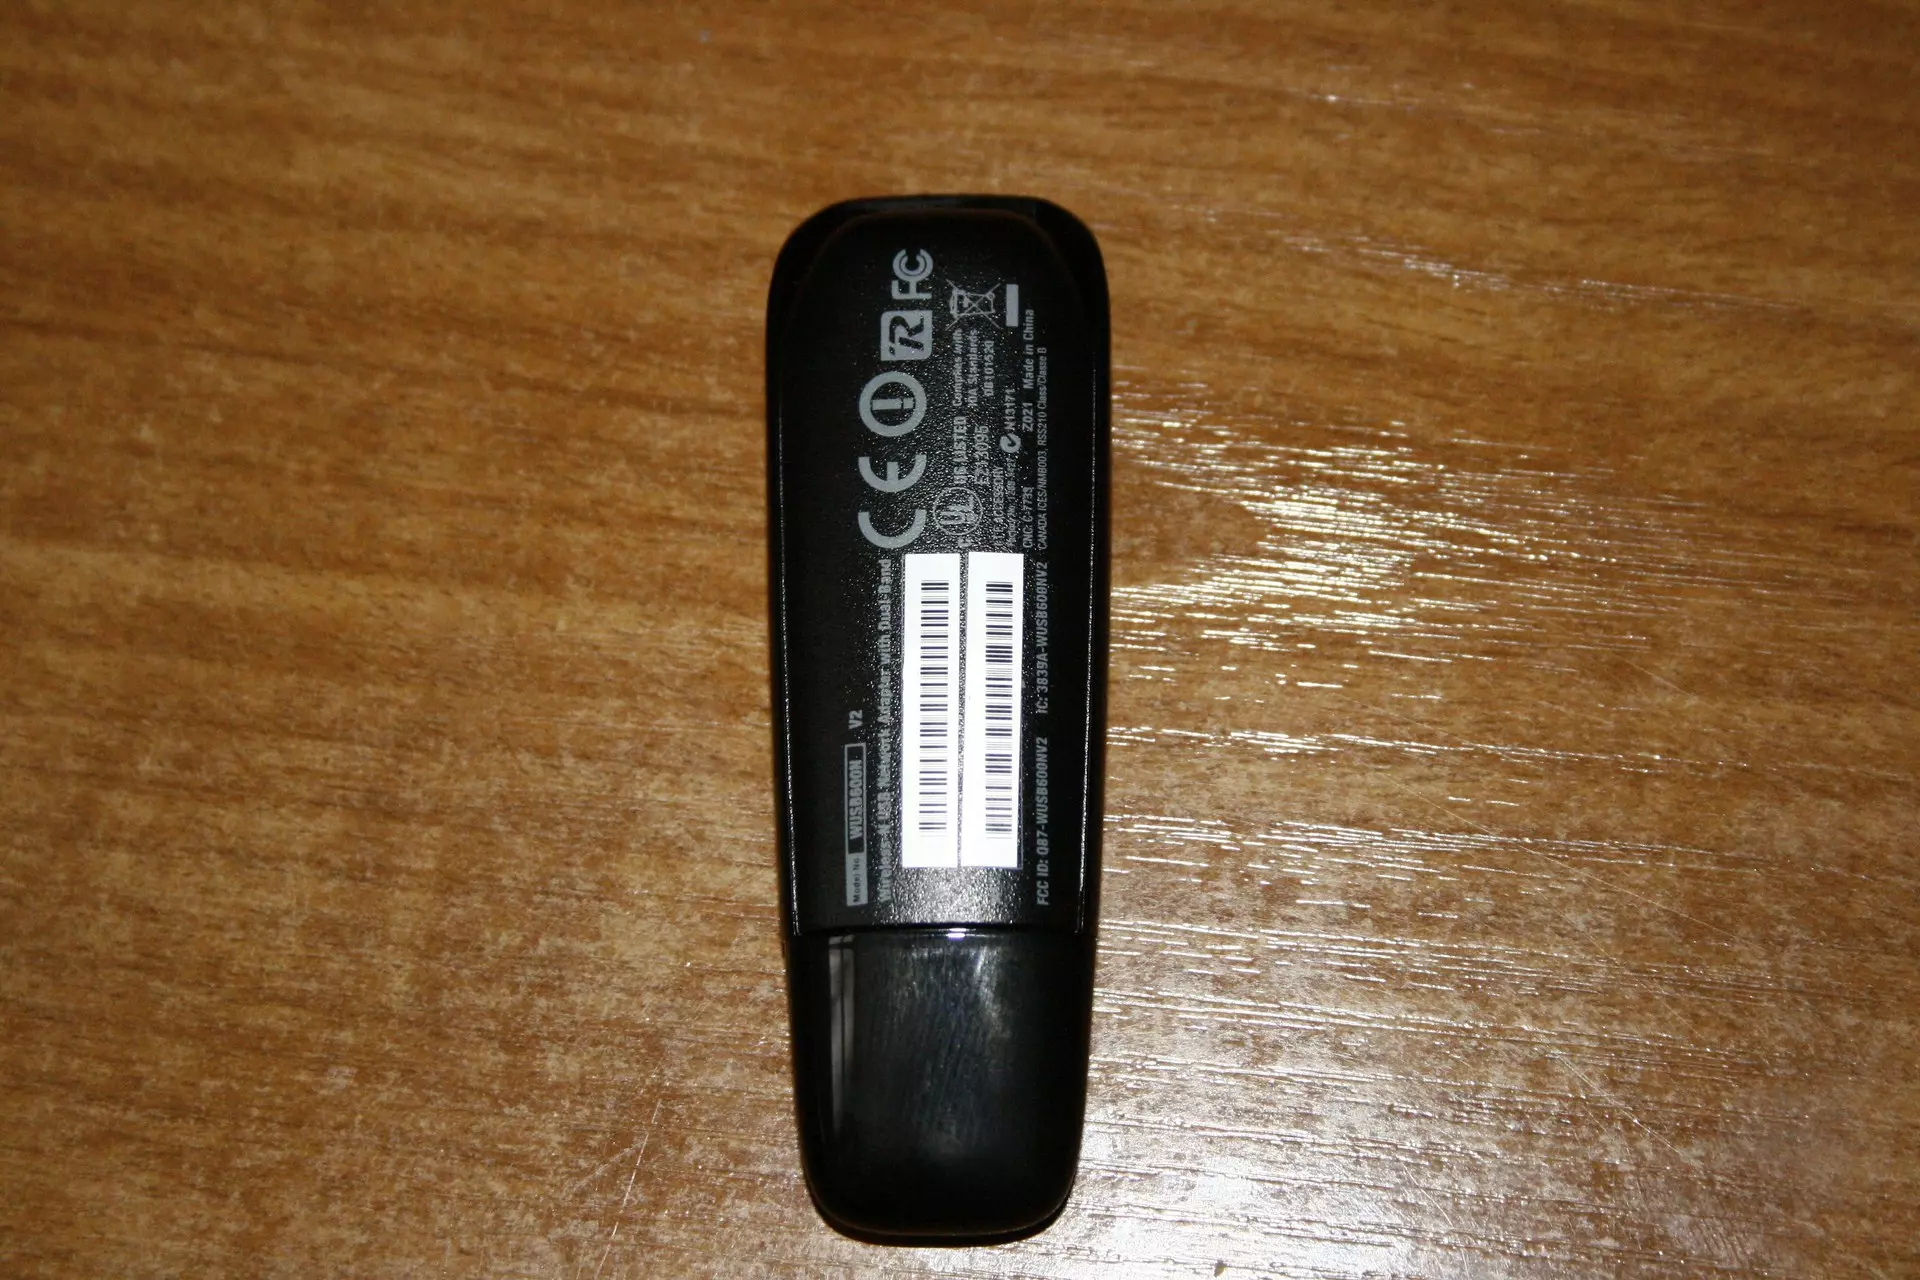 Linksys WUSB600N V2 without cap for USB connector